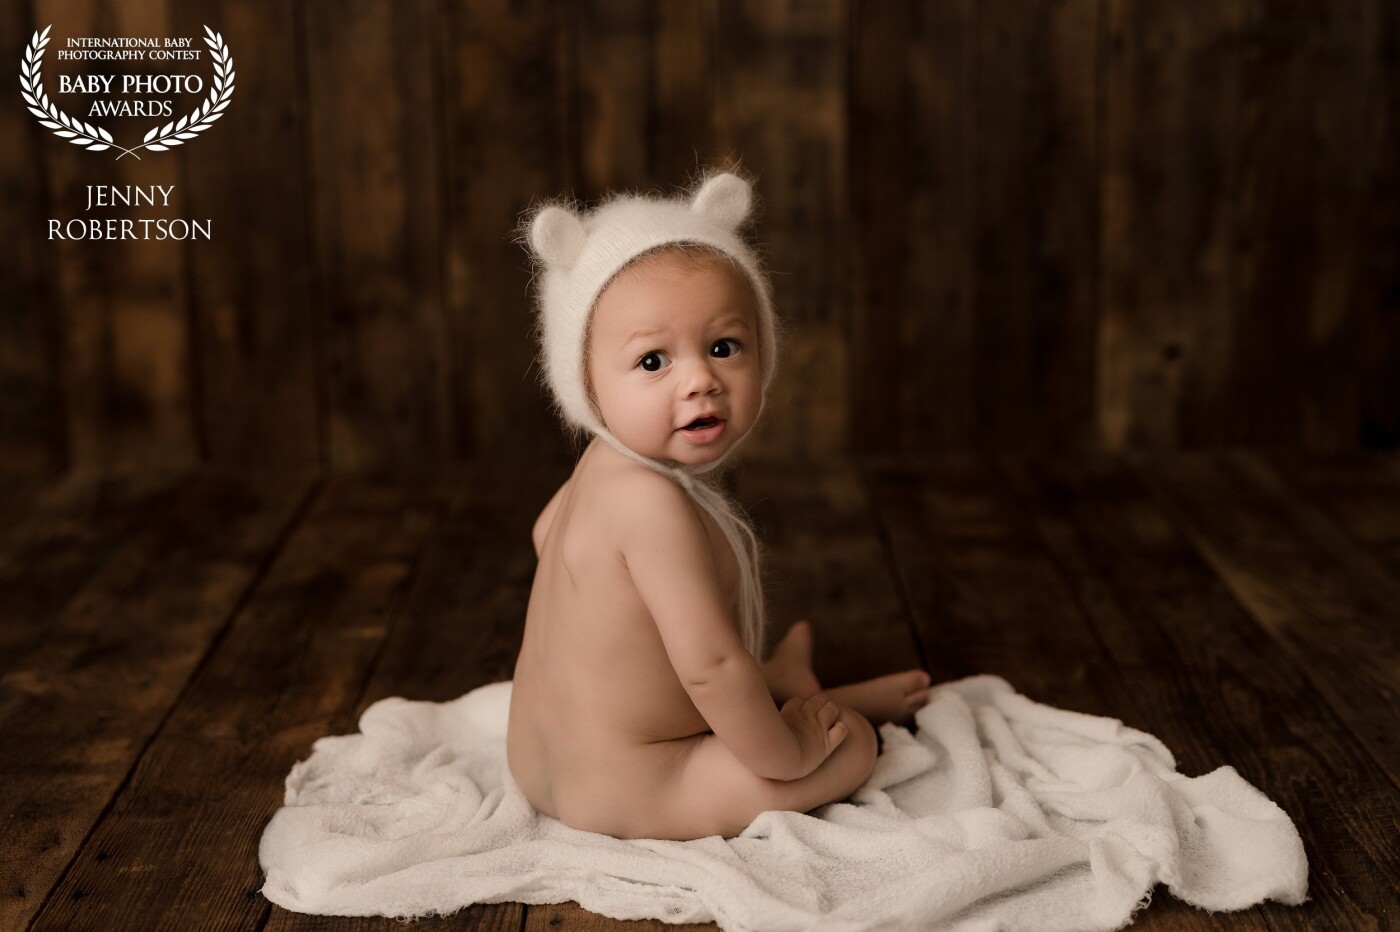 Oliver is such a beautiful little boy. I've had this image of him planned in my head since his newborn pictures when I posed him in a bucket with the same bear bonnet for newborns. He nailed this pose perfectly.